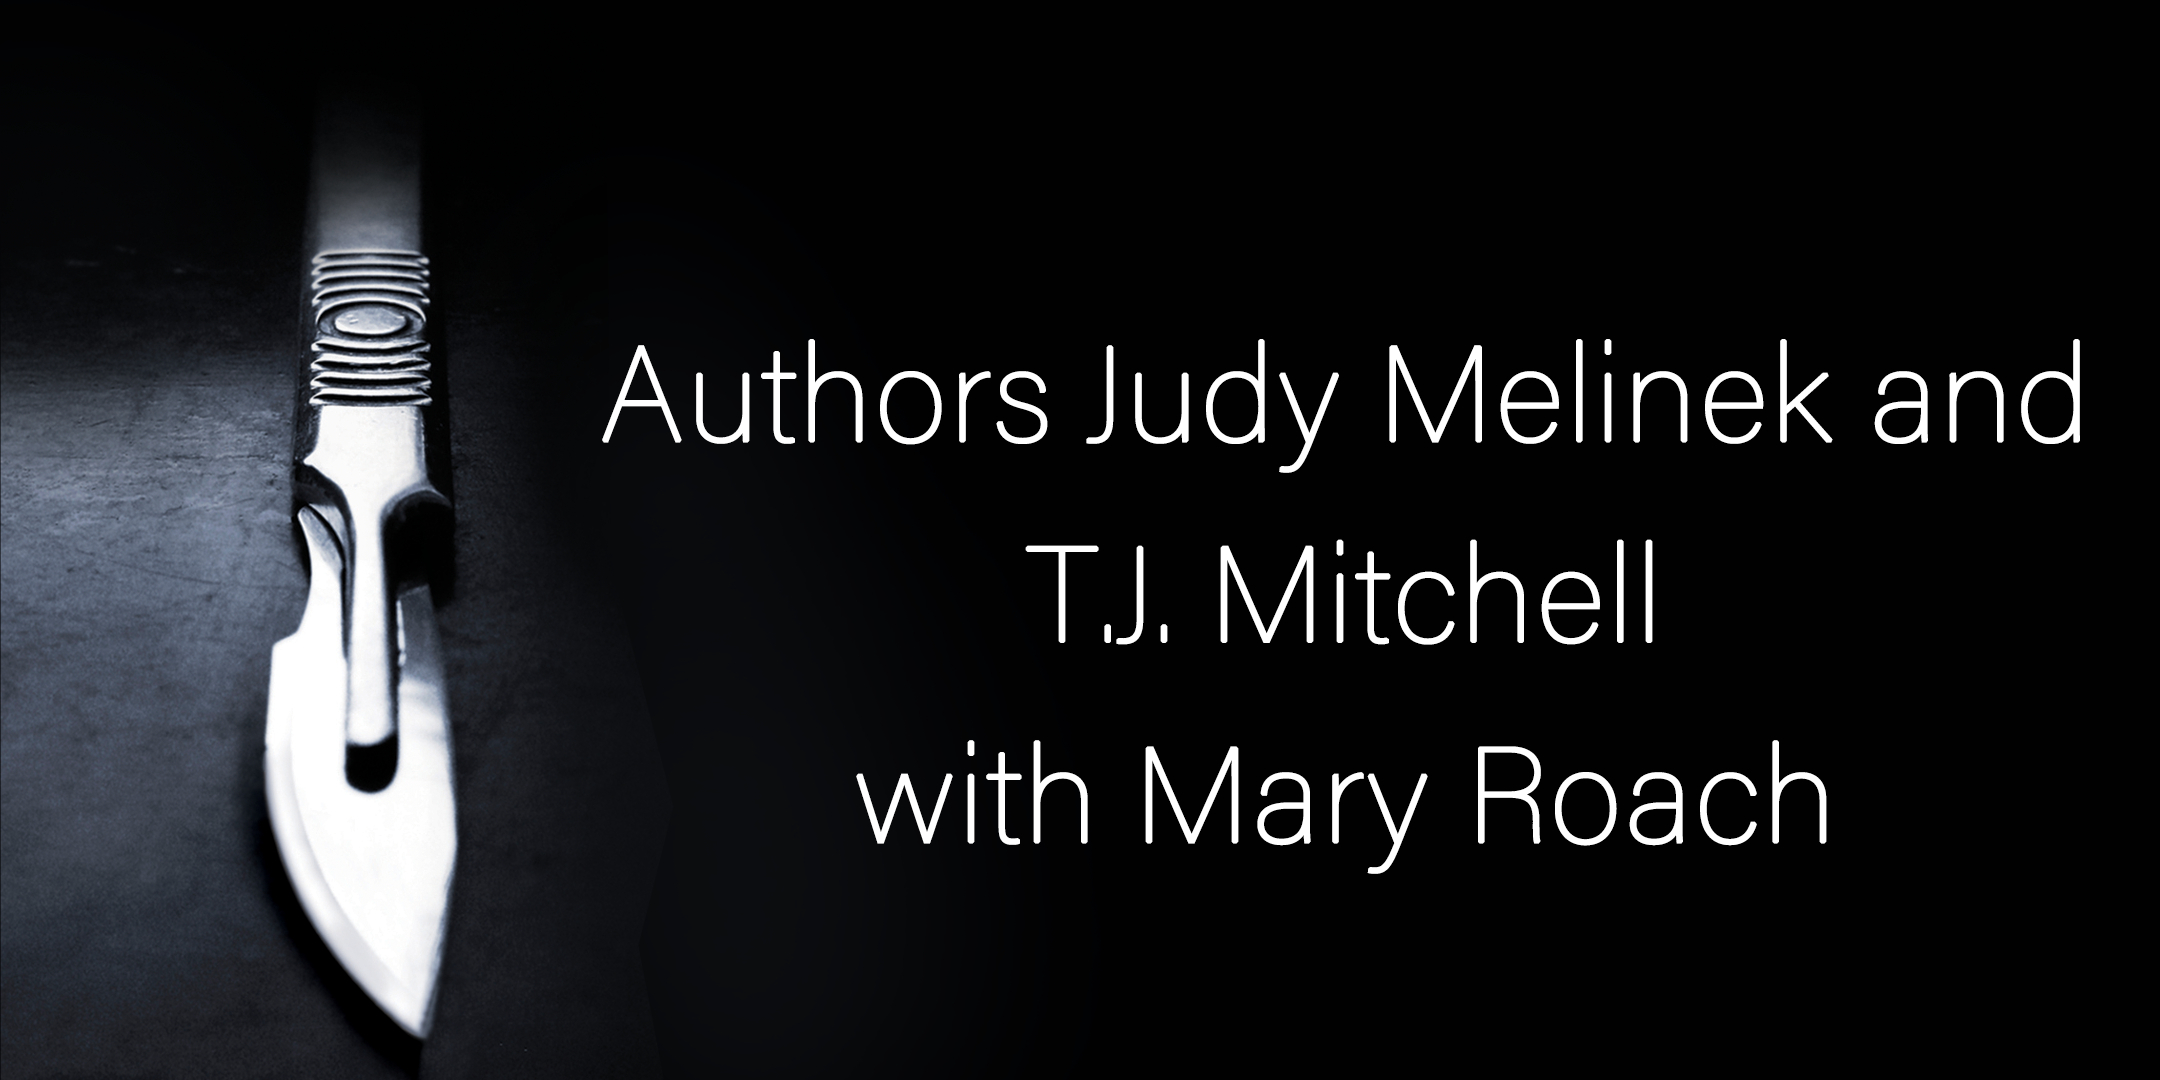 Authors Judy Melinek and T.J. Mitchell with Mary Roach